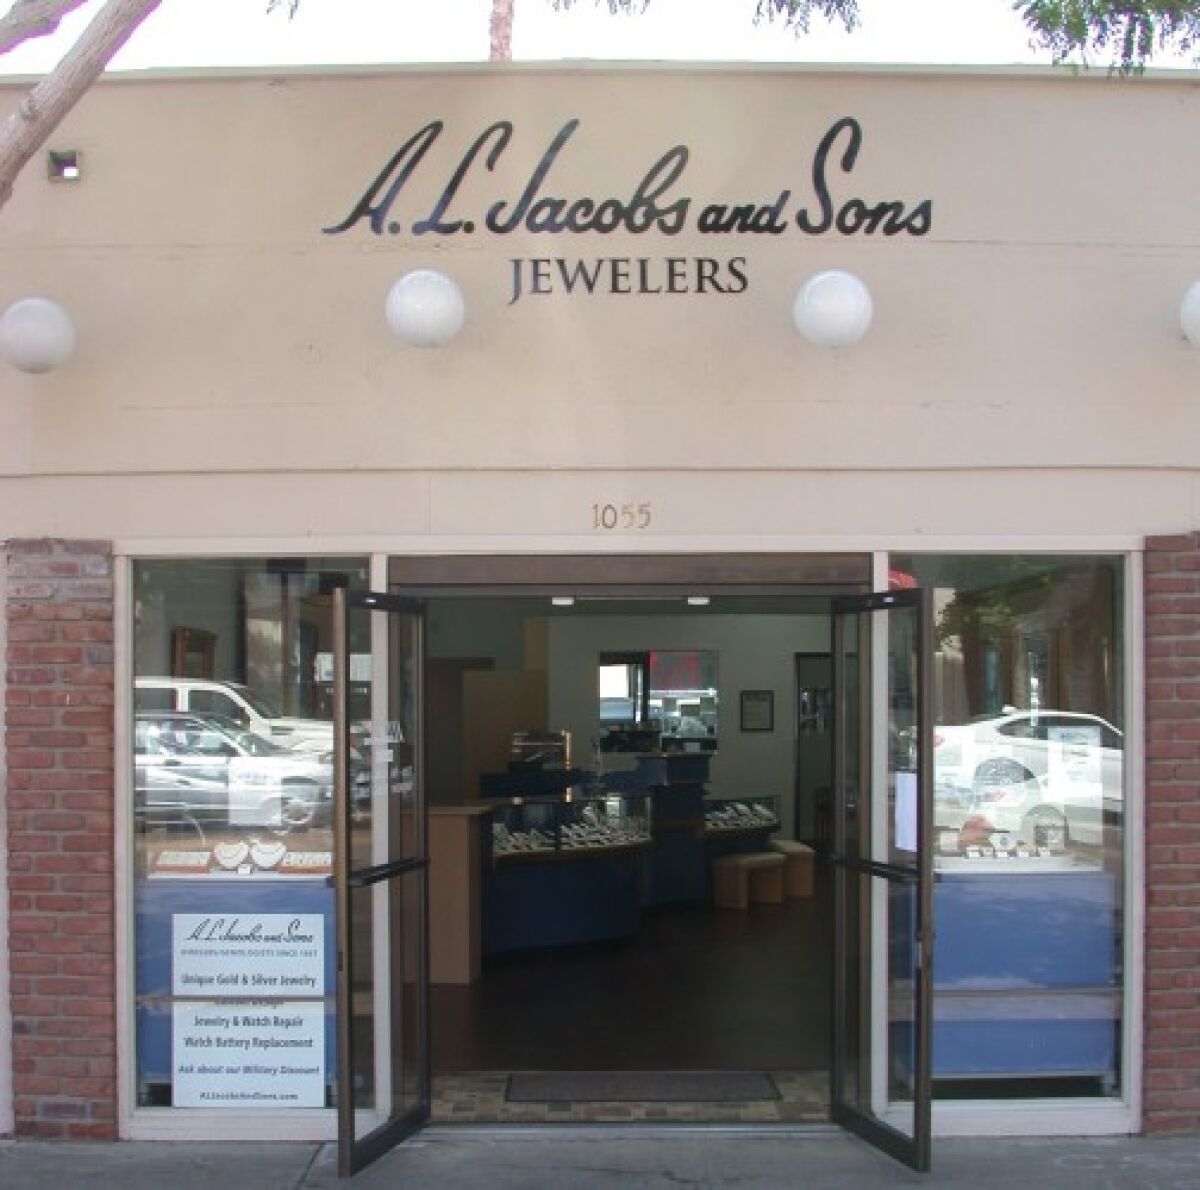 A.L. Jacobs and Sons Jewelers will close soon after 83 years in business.